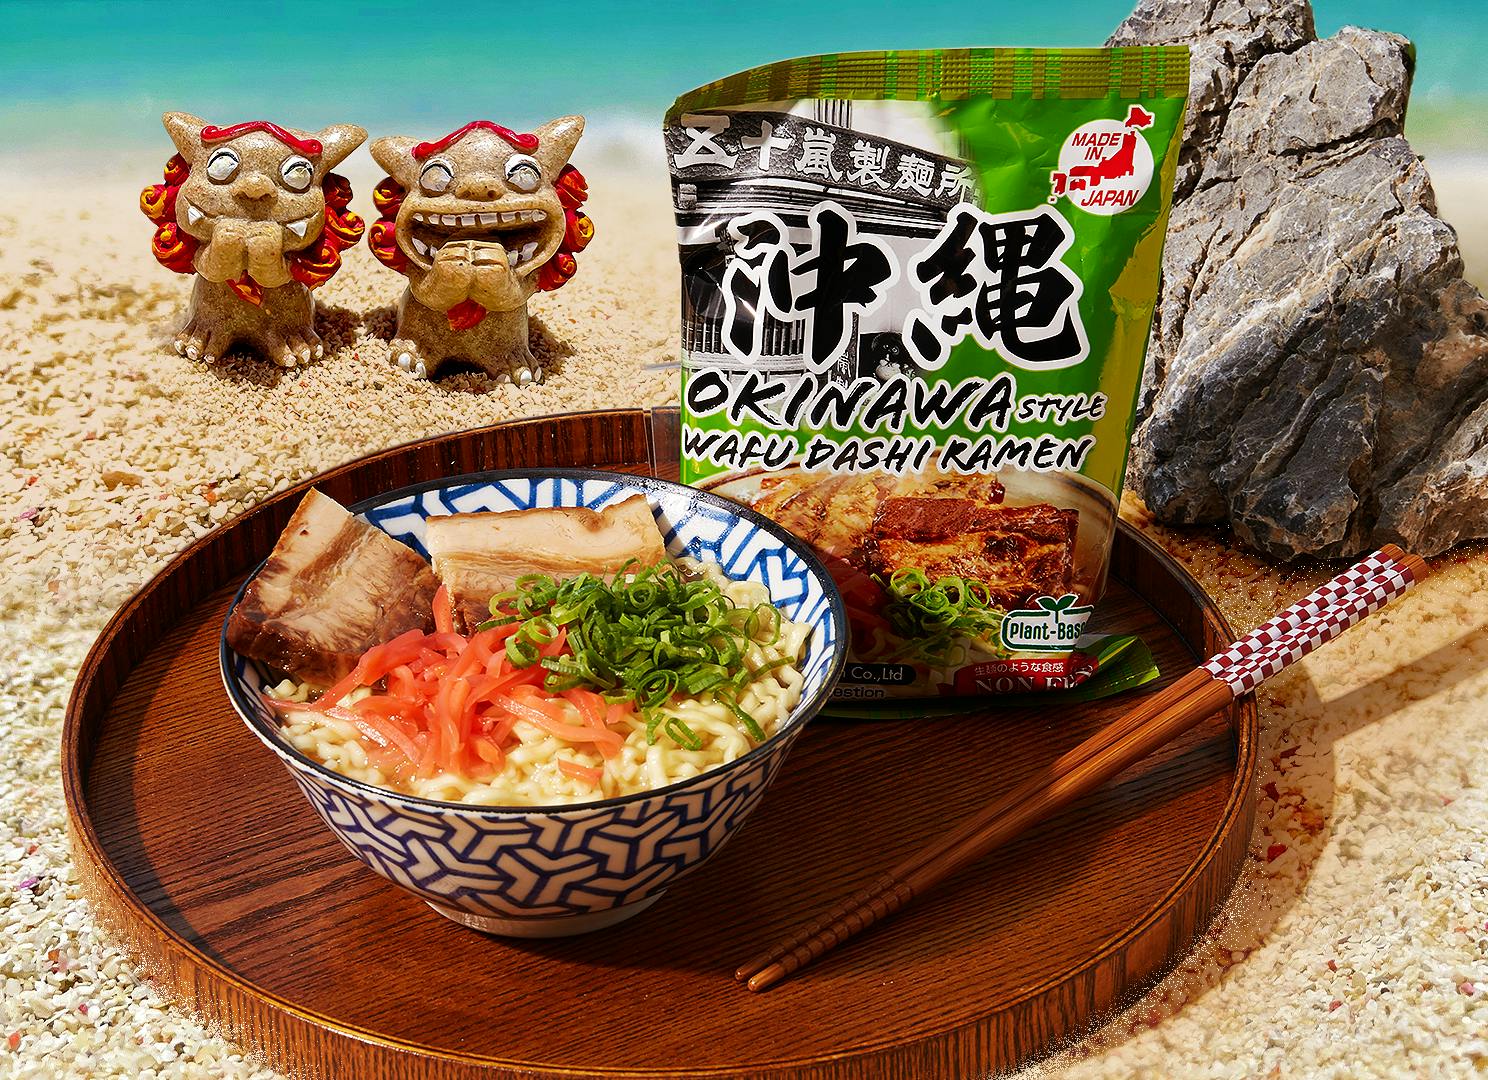 Okianwa Style Wafu Dashi Ramen sits on a wooden lacquer tray on a beach in Okinawa.